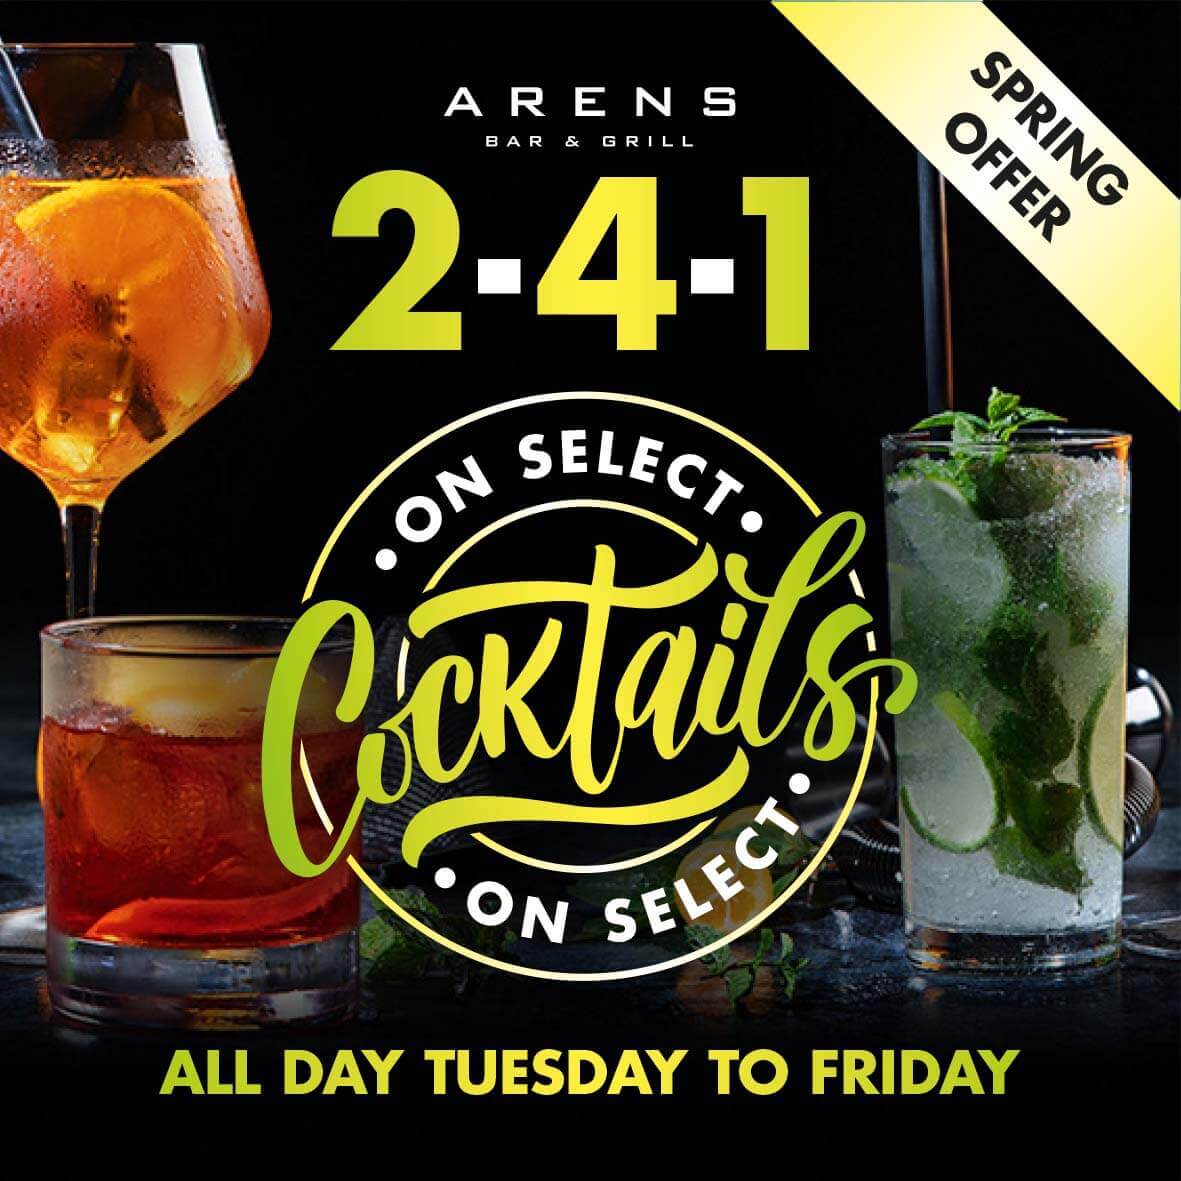 2 for 1 Cocktails at Arenss May